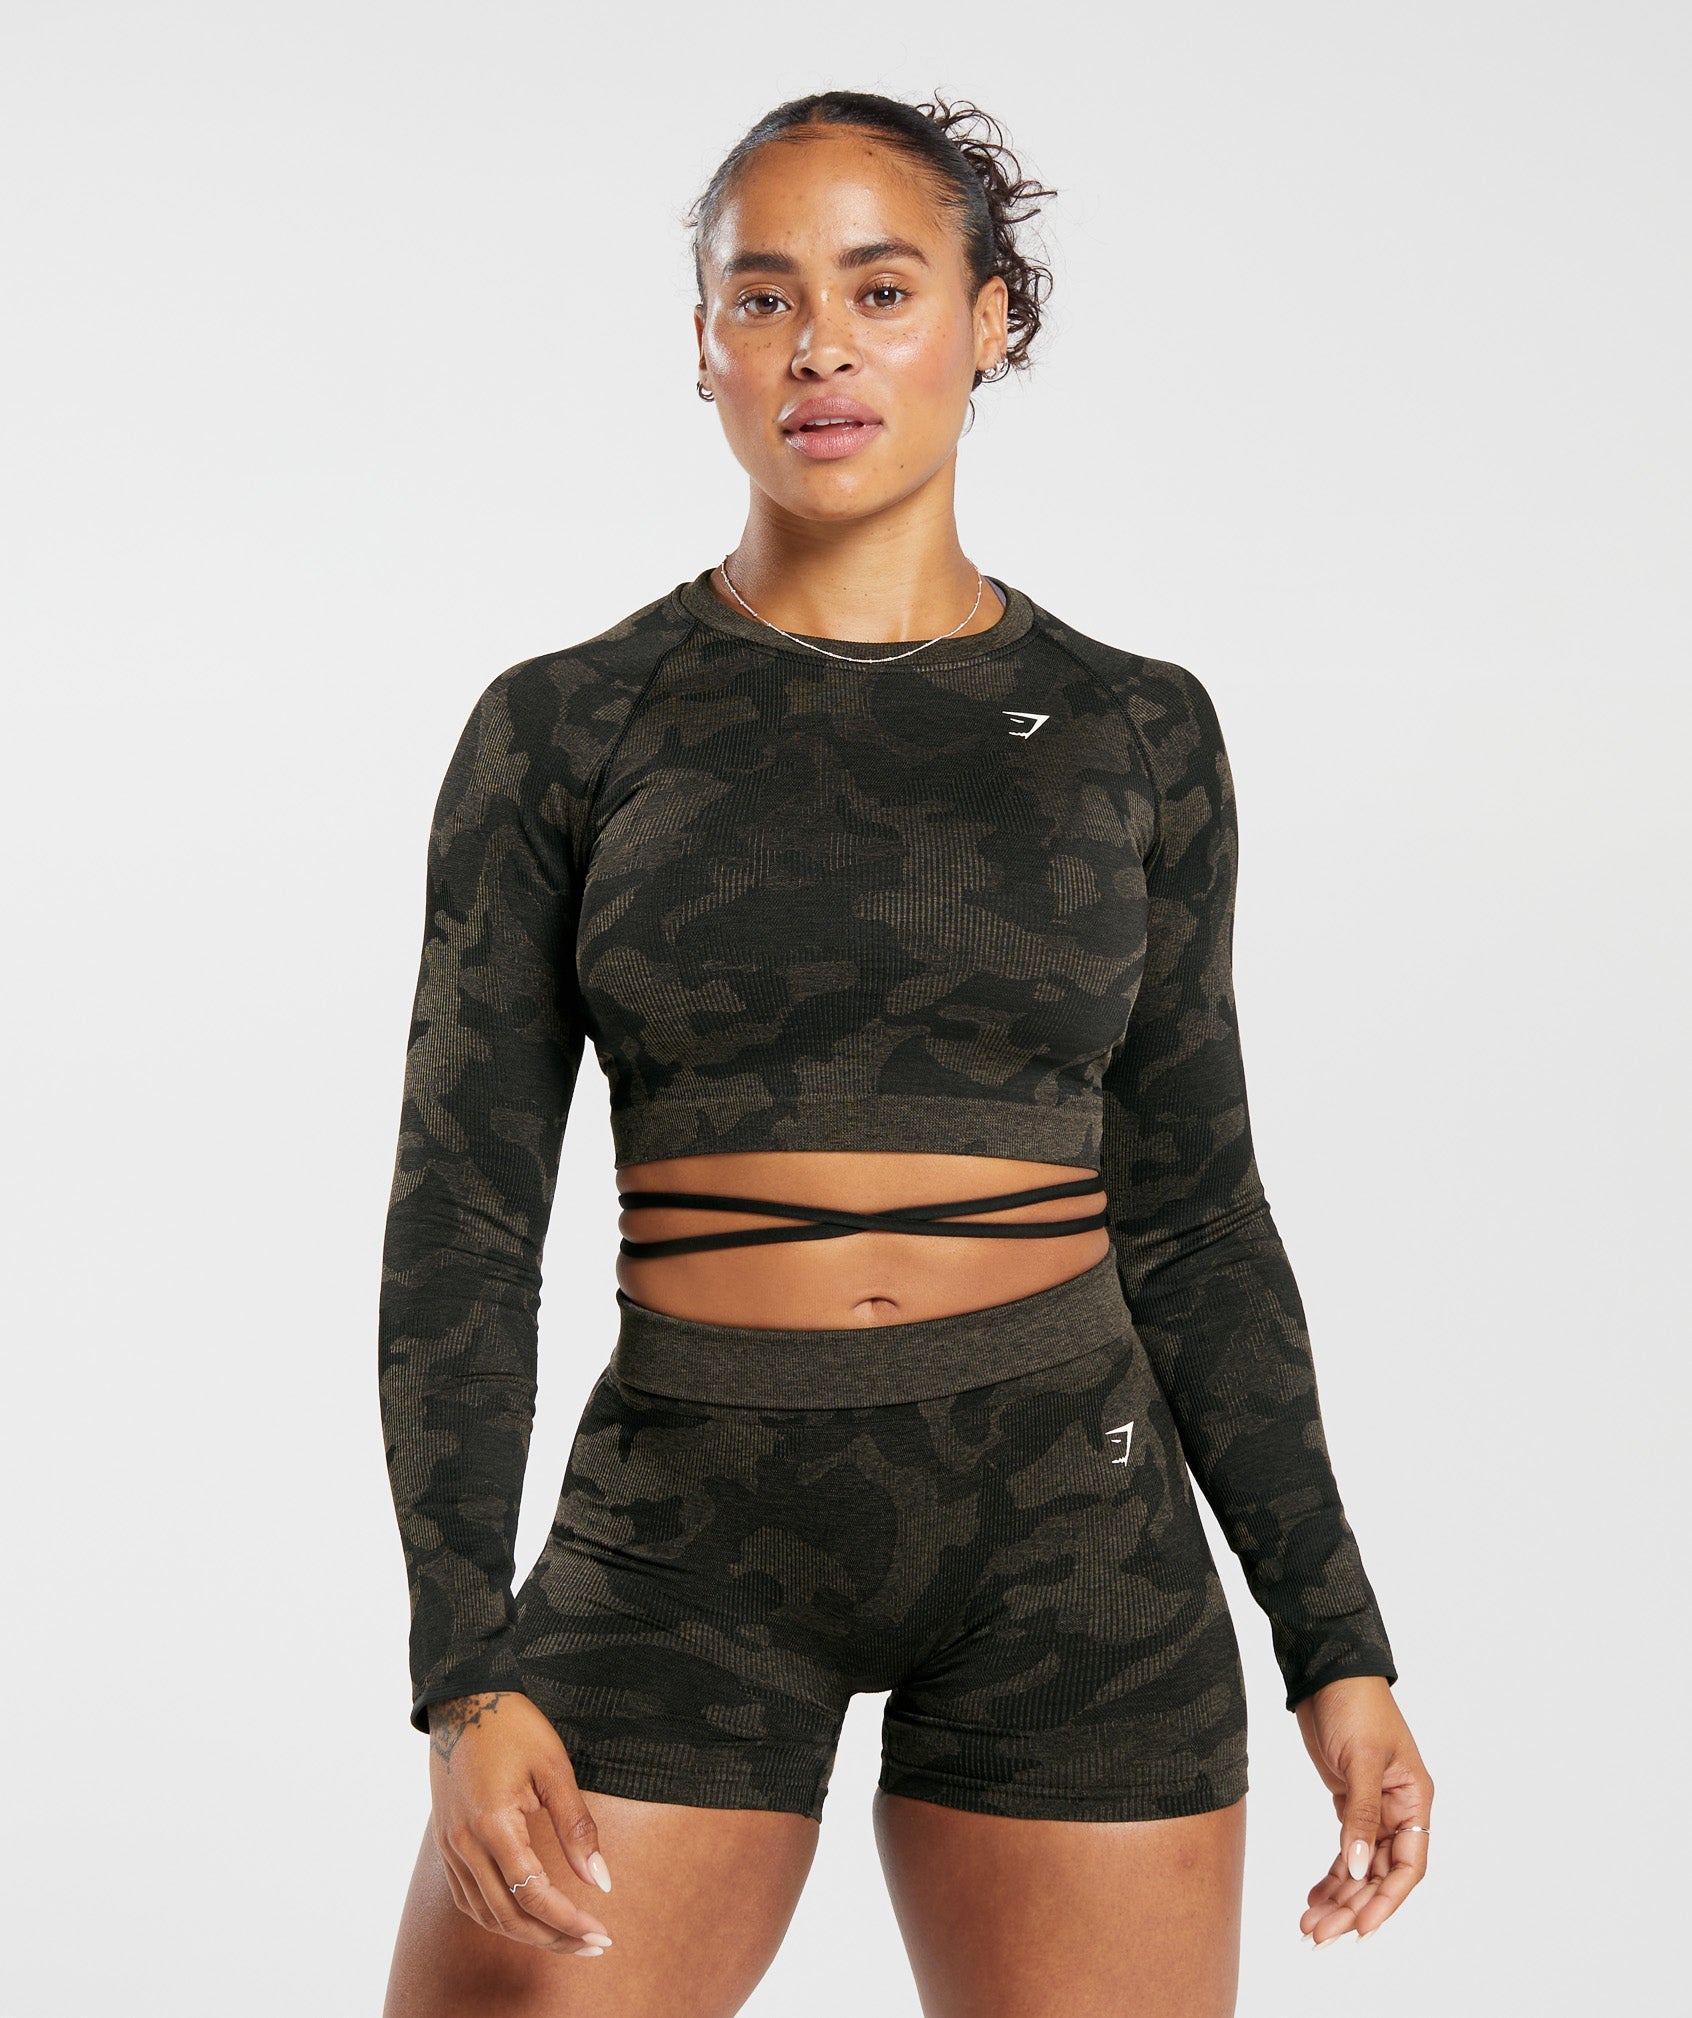 BF Women's Crop Top Hooded Short Set - The Black Fit Active Sports